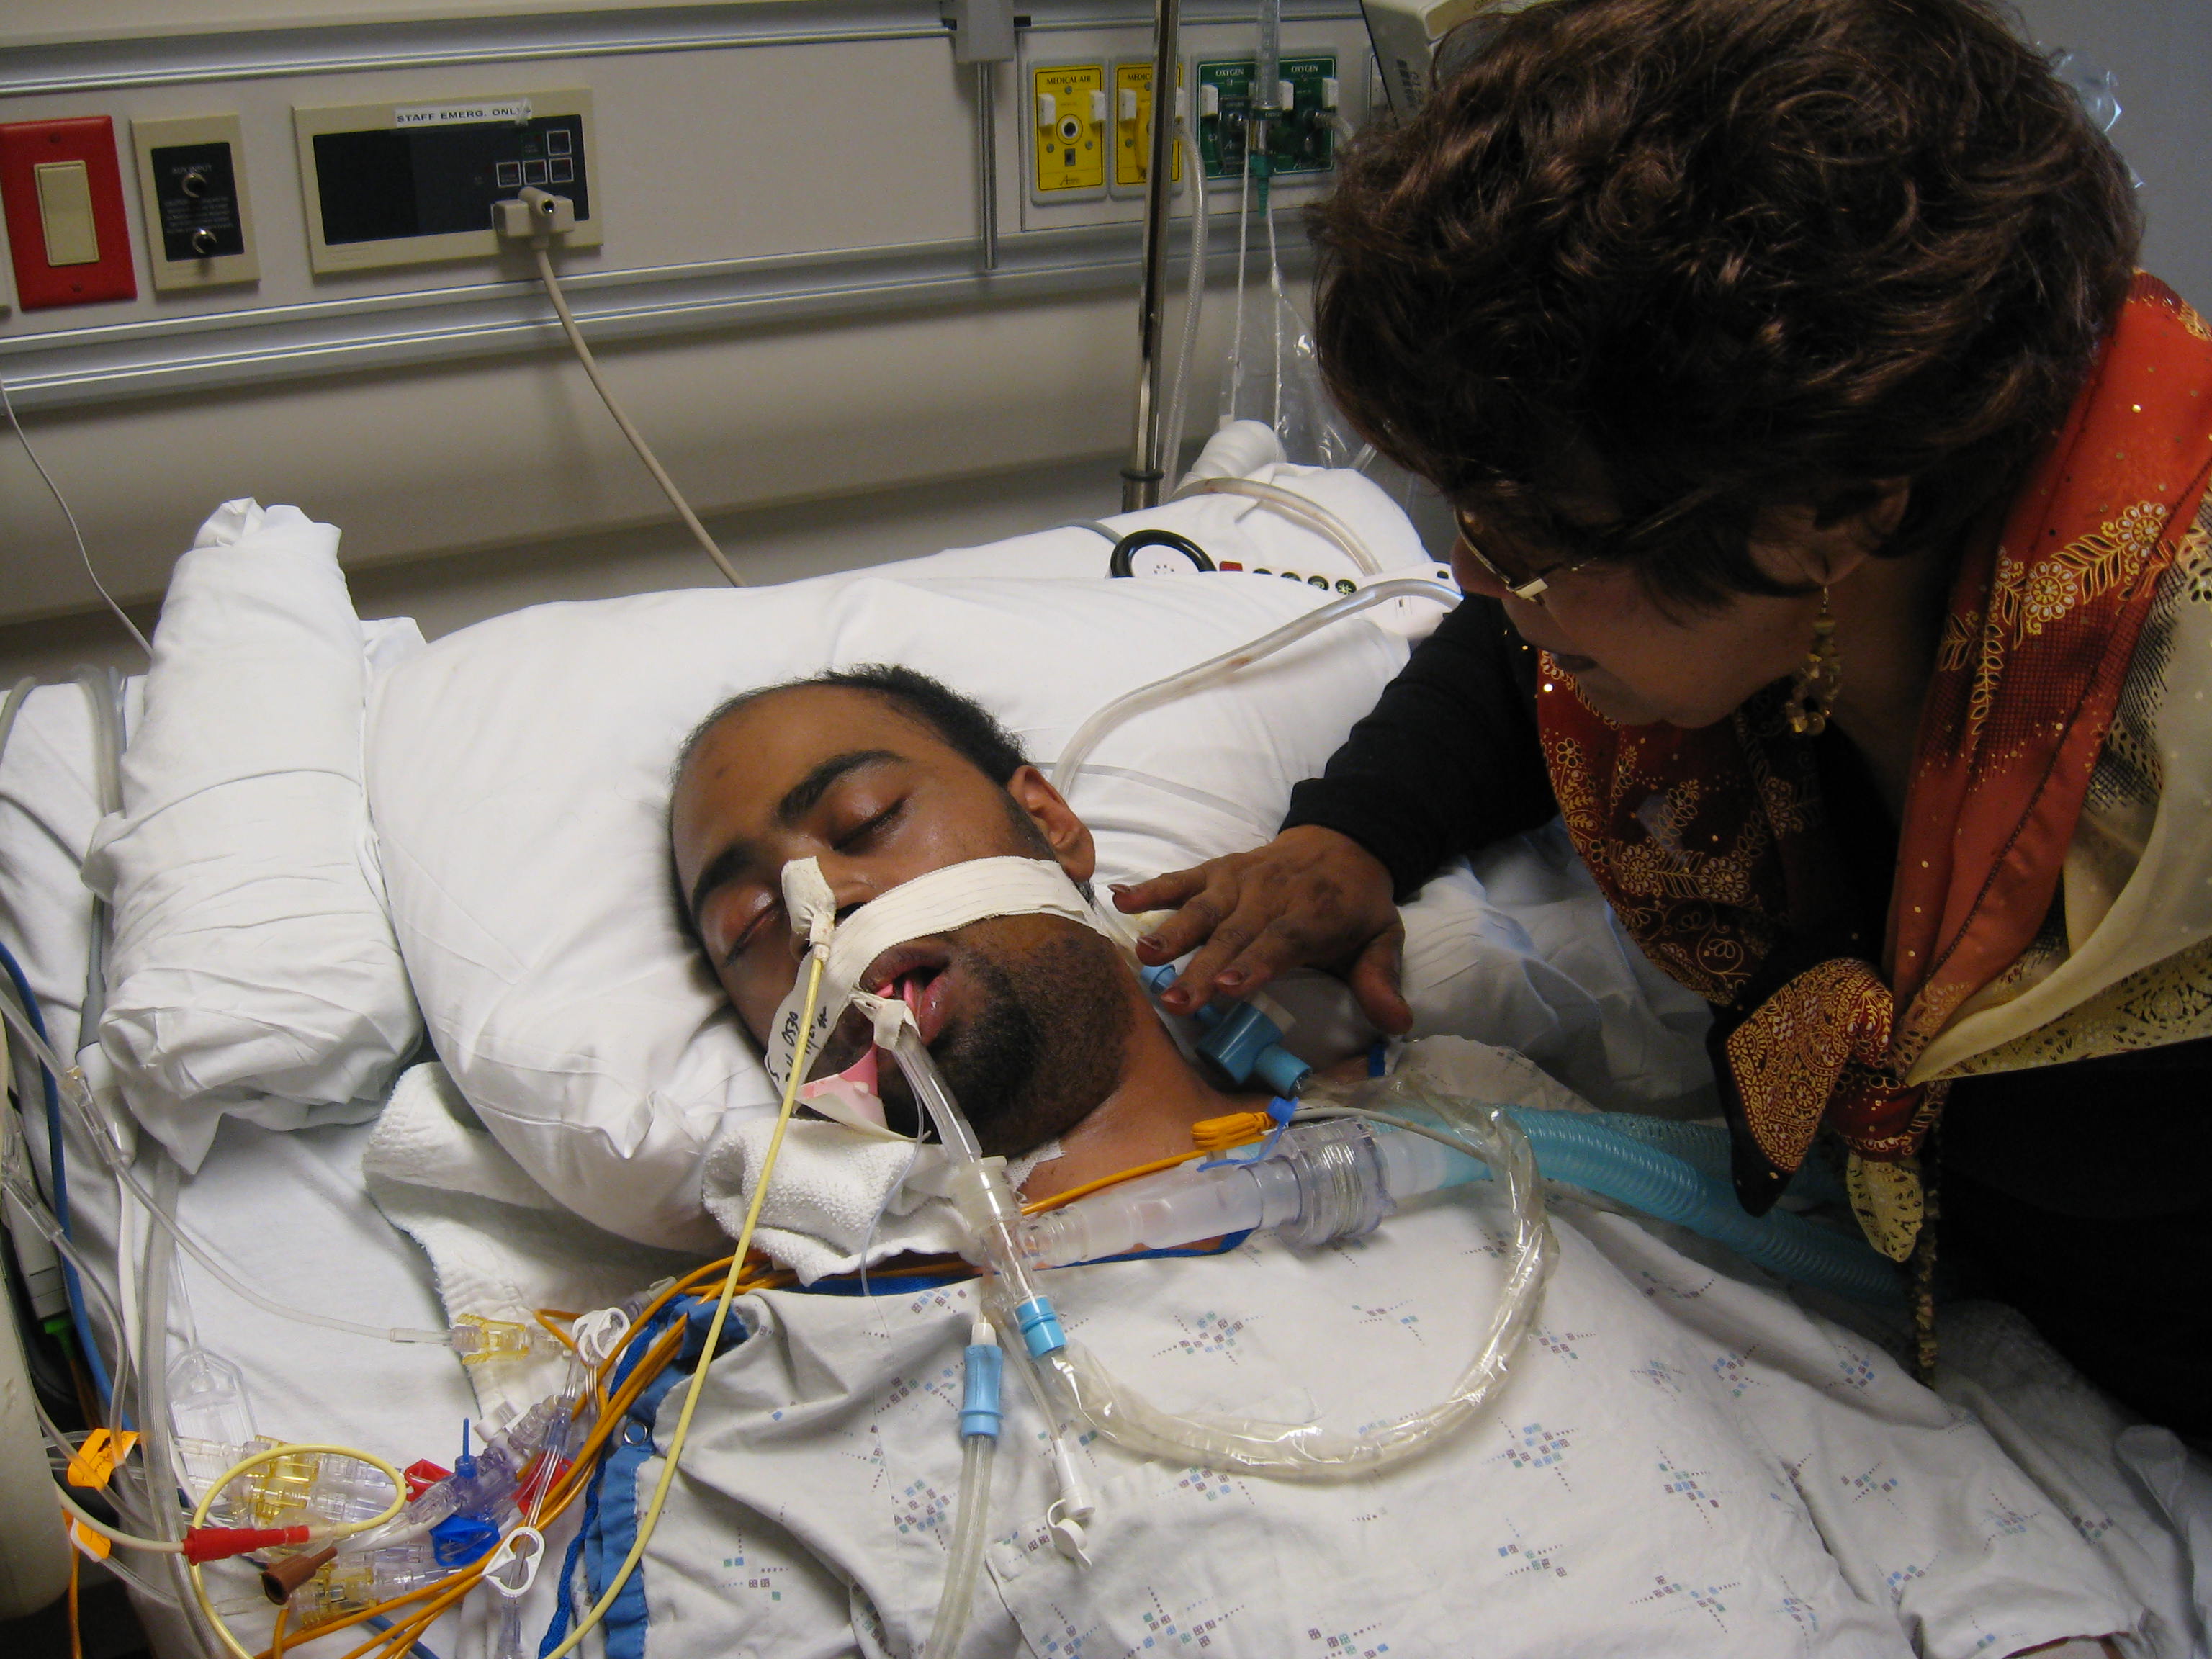 Mom watching over David Nov 2007 during Coma  